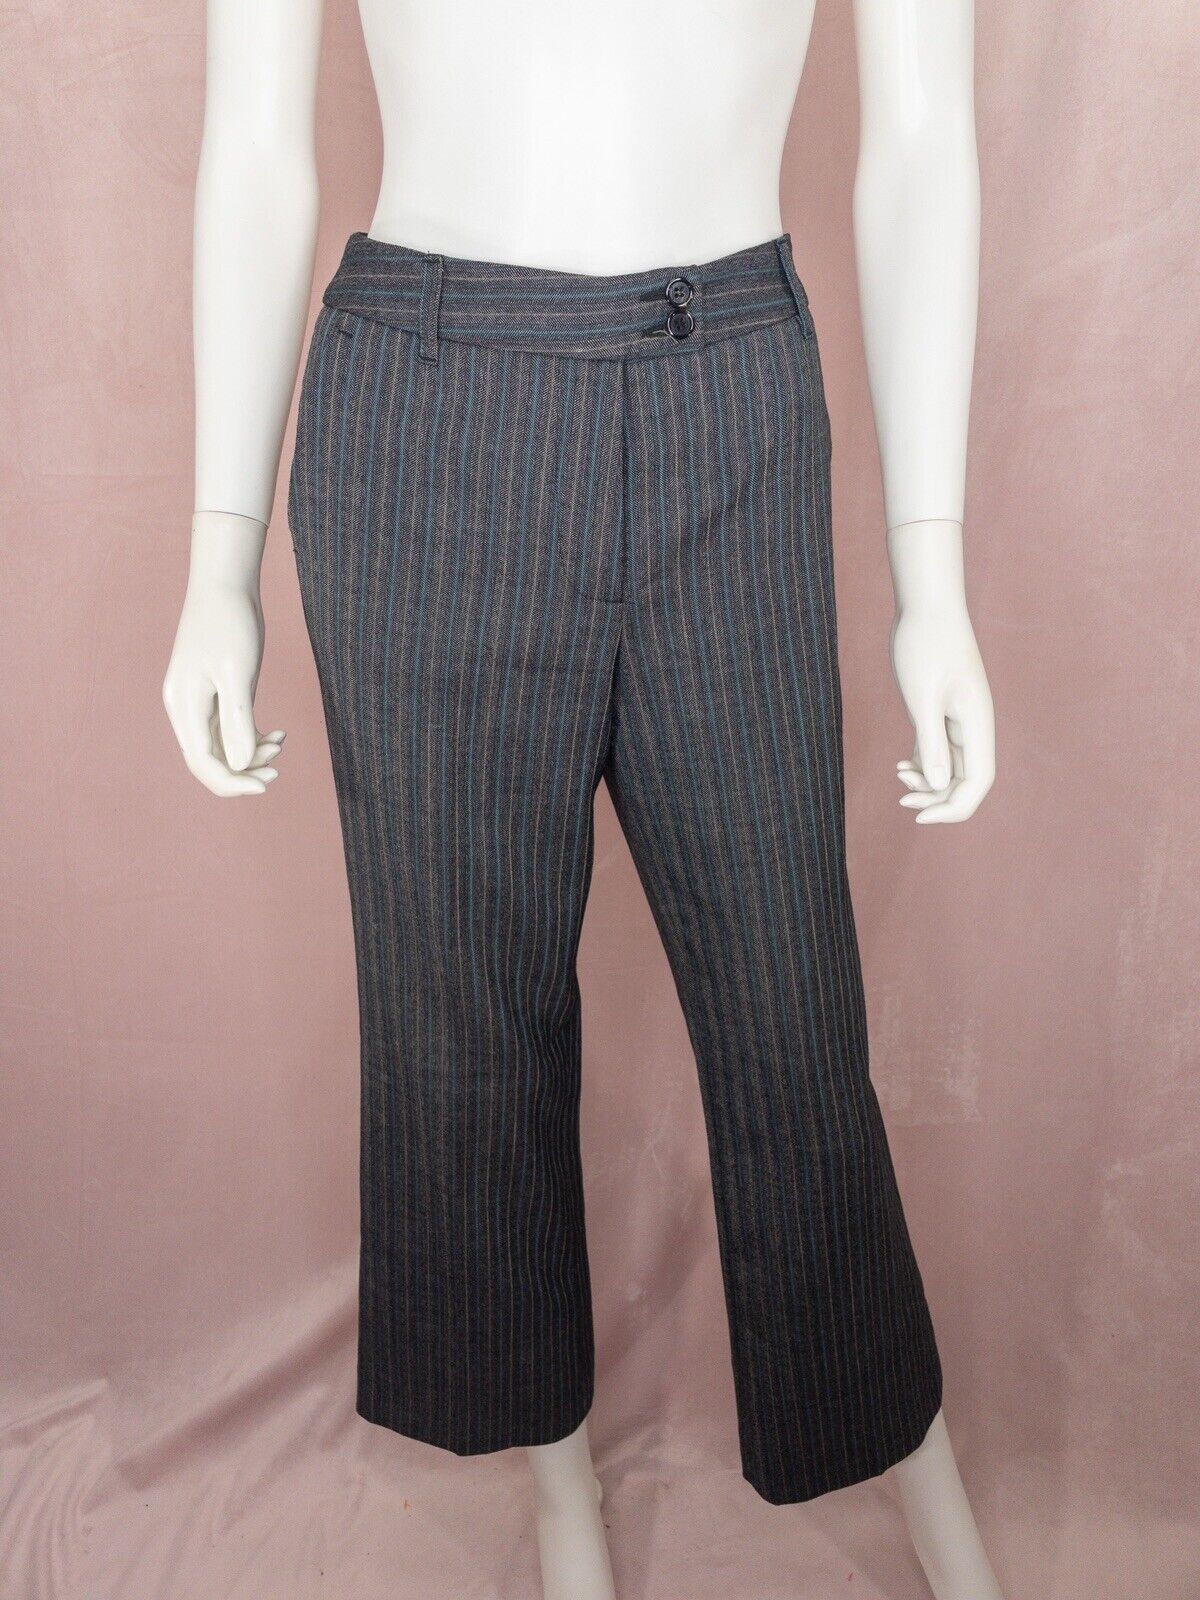 Etro Women’s Pinstriped Straight Leg Brown Wool Trouser Pants Size Italy 42 US 6